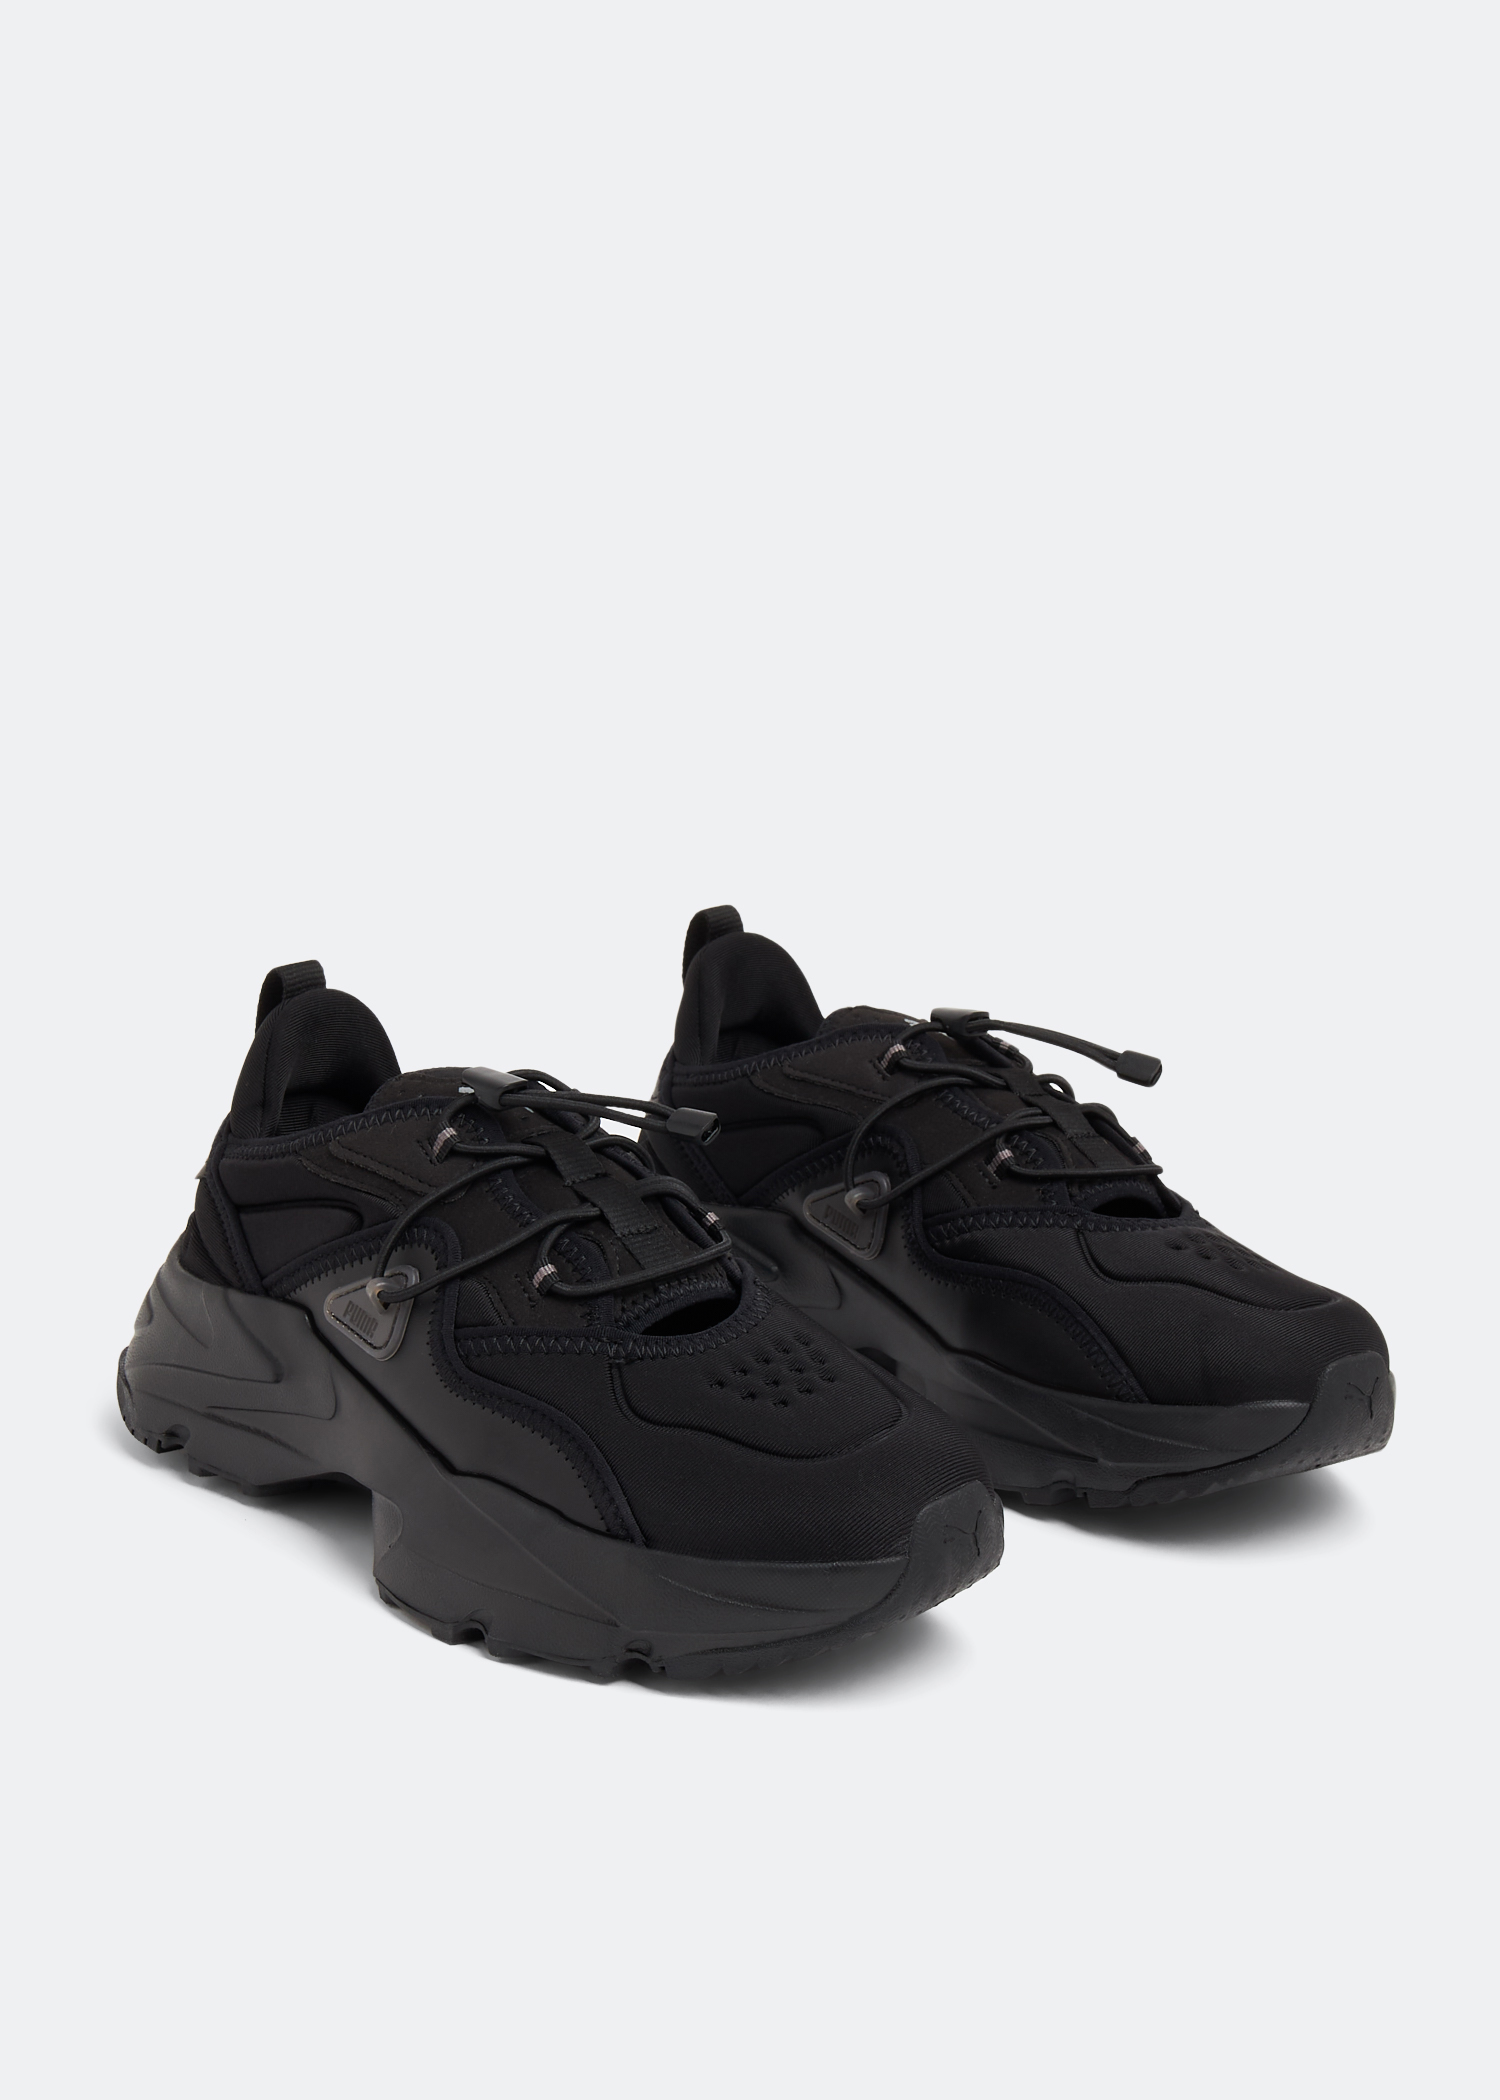 Puma Orkid Sandal sneakers for Women - Black in Kuwait | Level Shoes